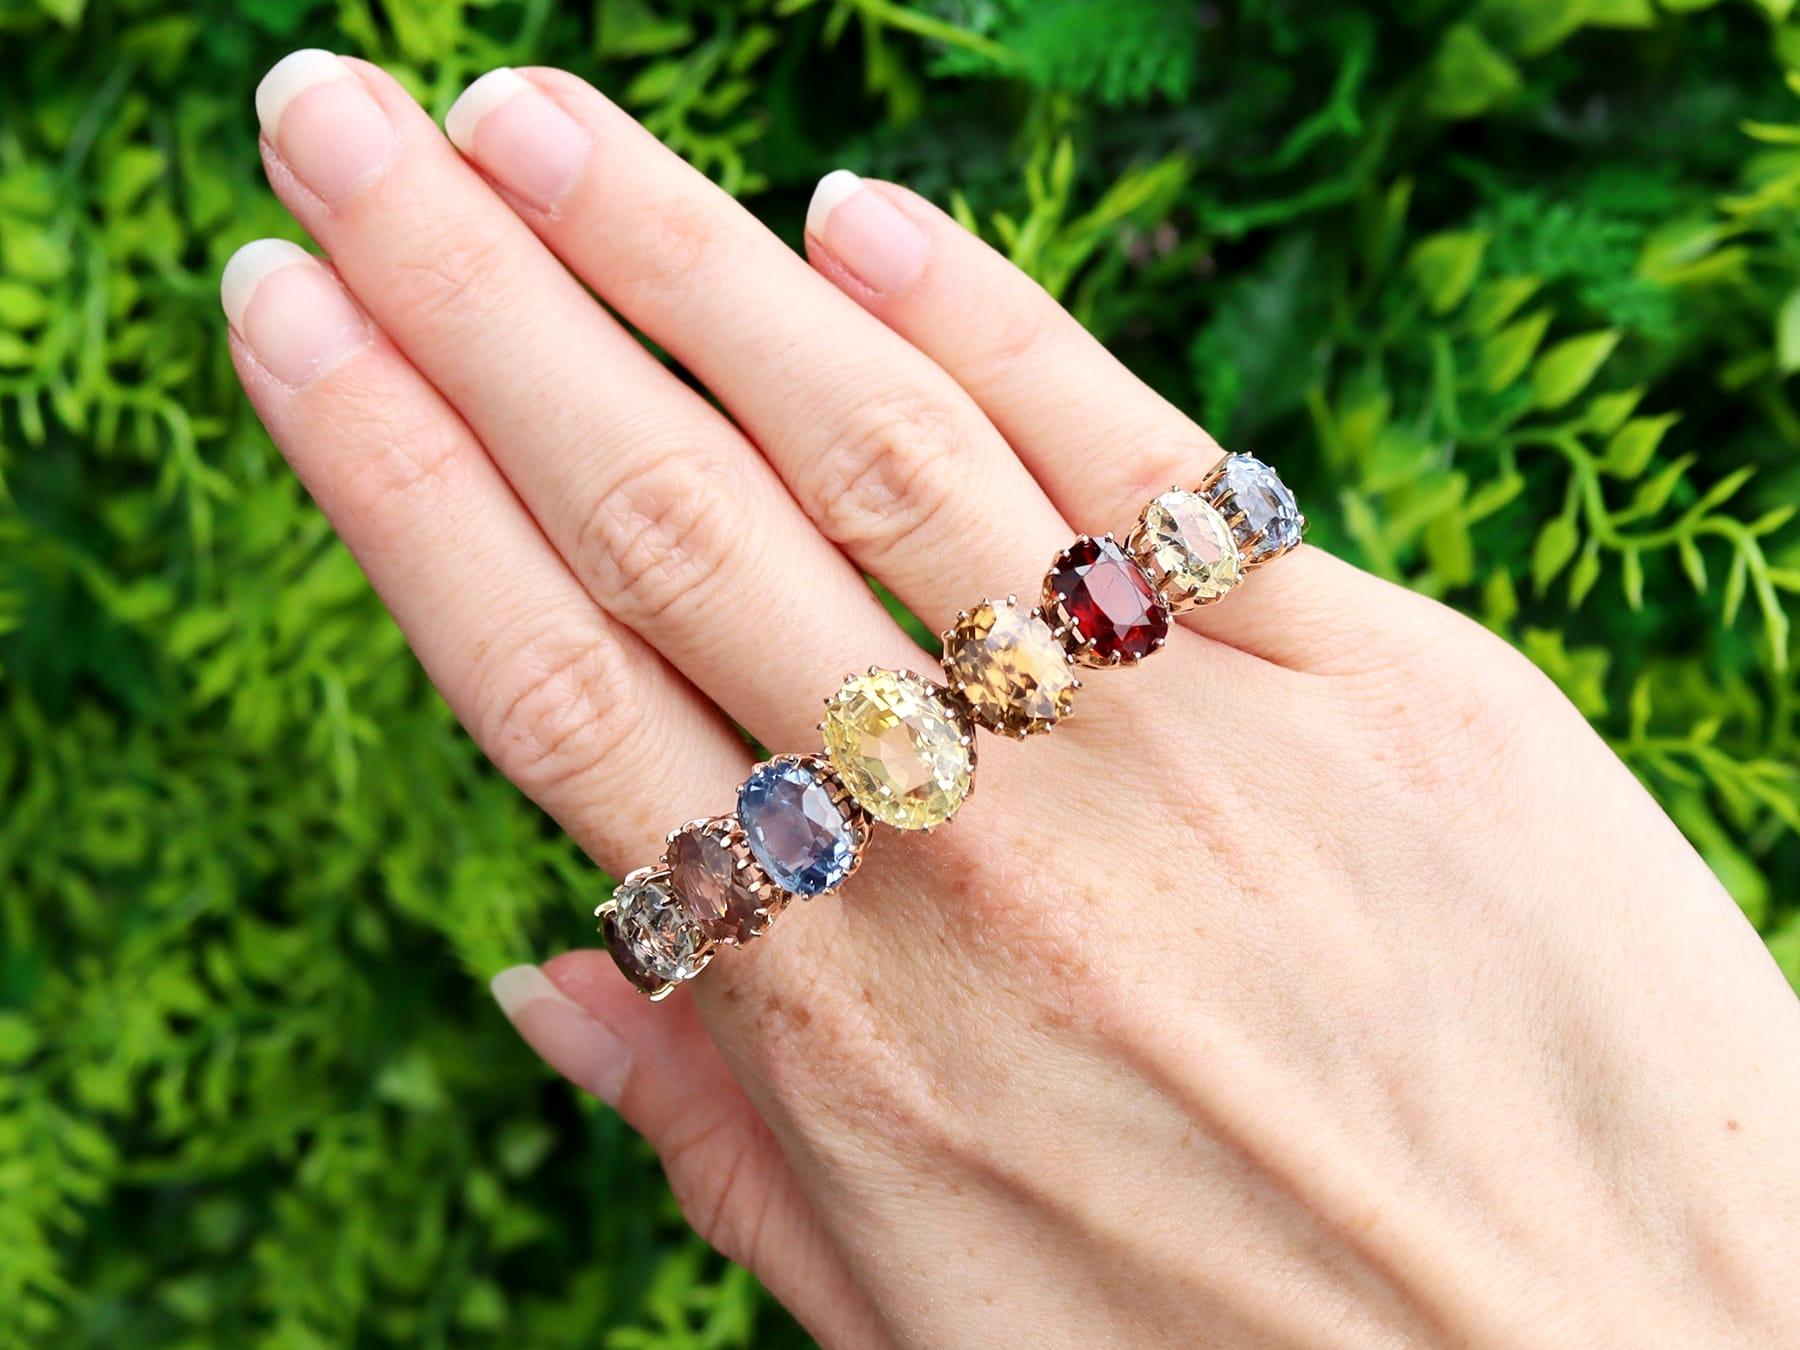 This stunning, fine and impressive antique gemstone bangle has been crafted in 9k yellow gold.

The anterior portion of this Victorian bangle is embellished with a linear array of nine claw-set oval faceted cut gemstones, graduating in size